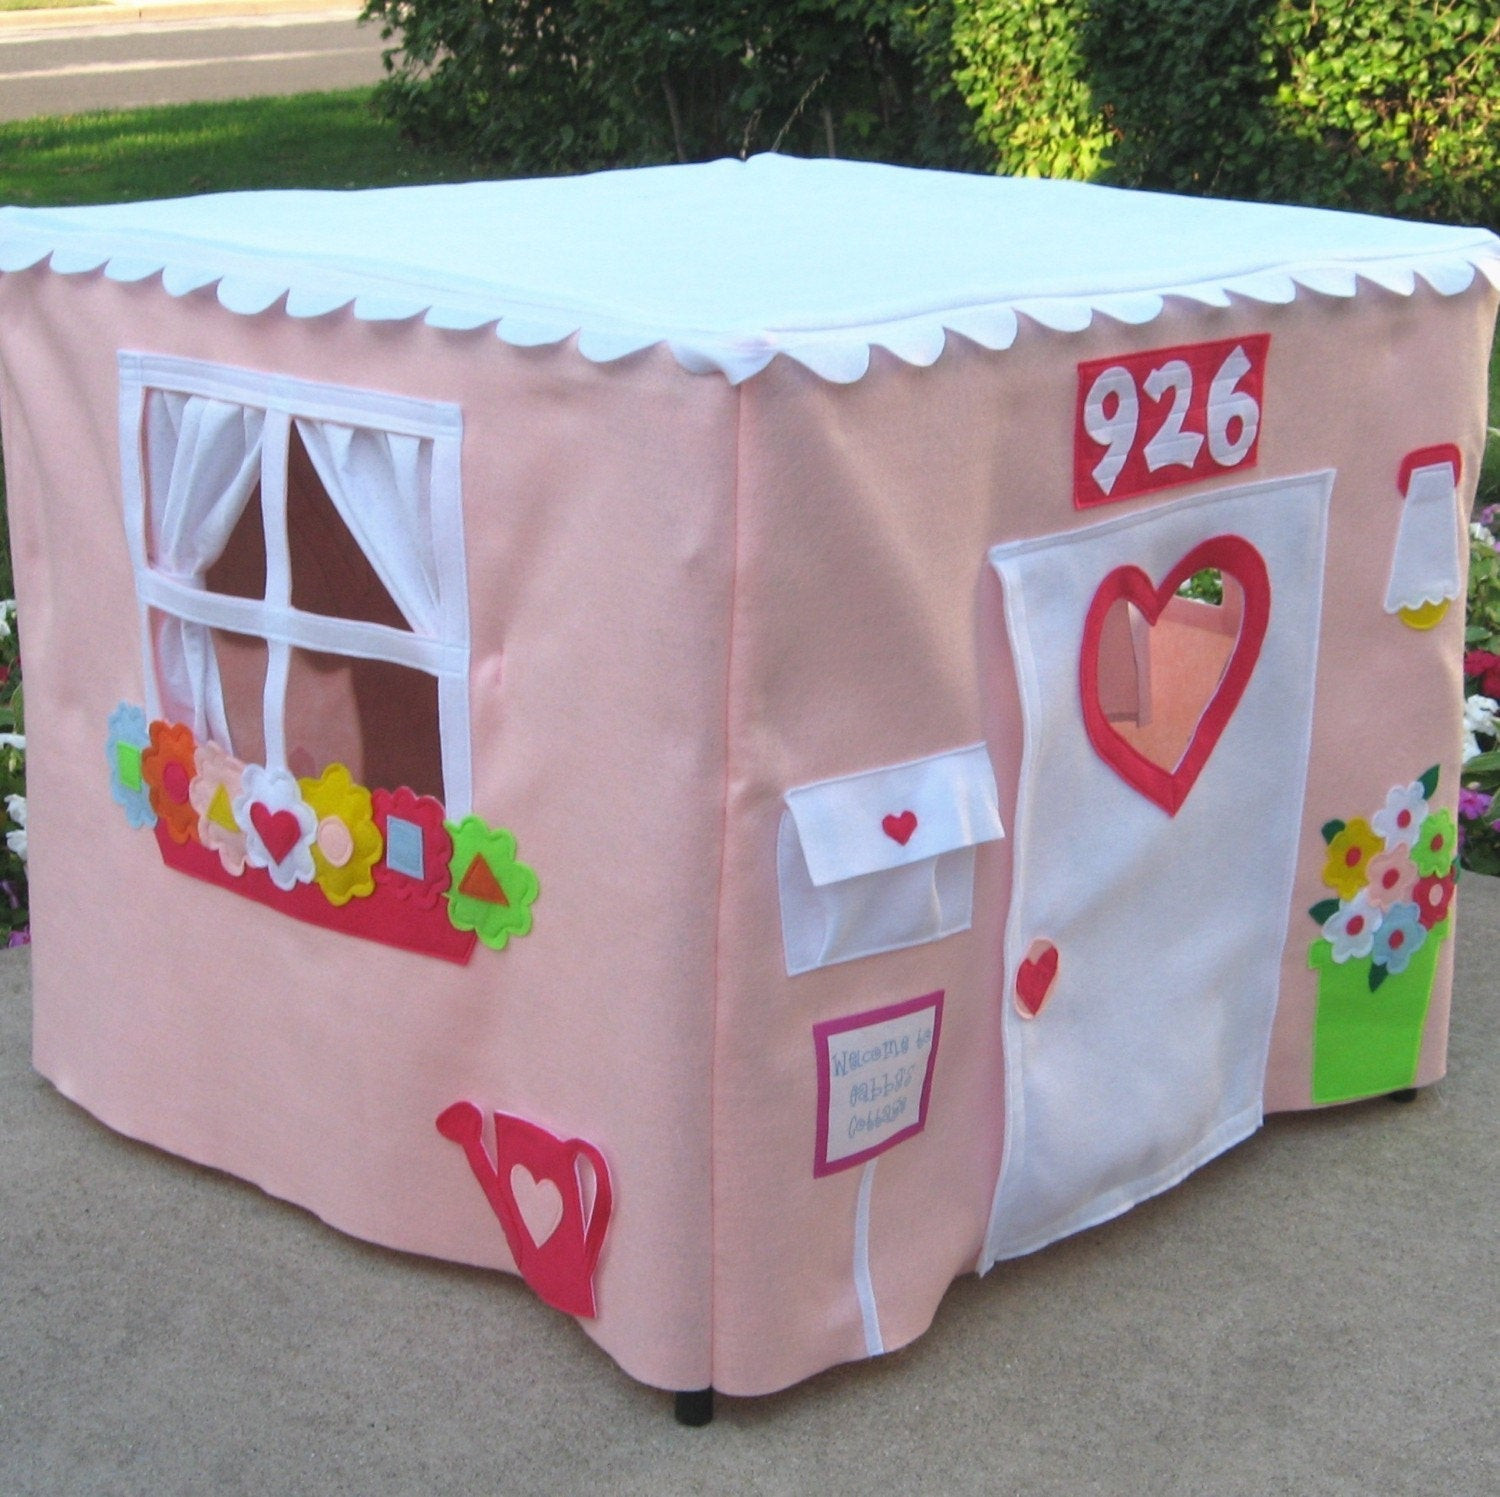 Kids Card Table
 Pink Tablecloth Playhouse Card Table Playhouse Kids Tent